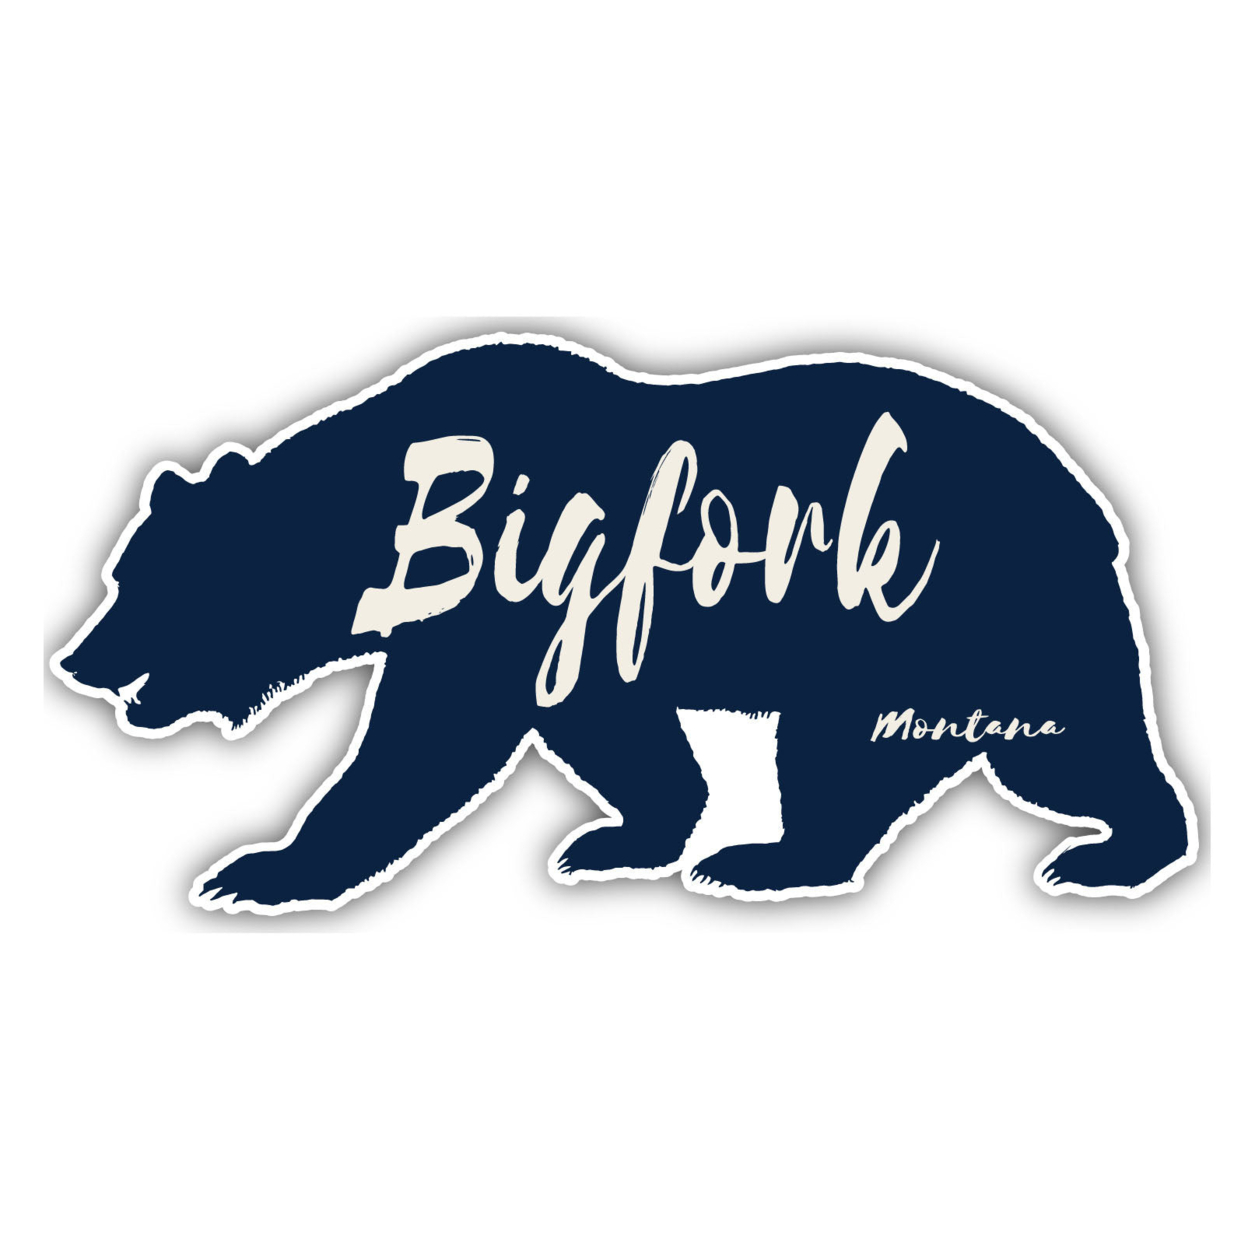 Bigfork Montana Souvenir Decorative Stickers (Choose Theme And Size) - 4-Pack, 10-Inch, Great Outdoors